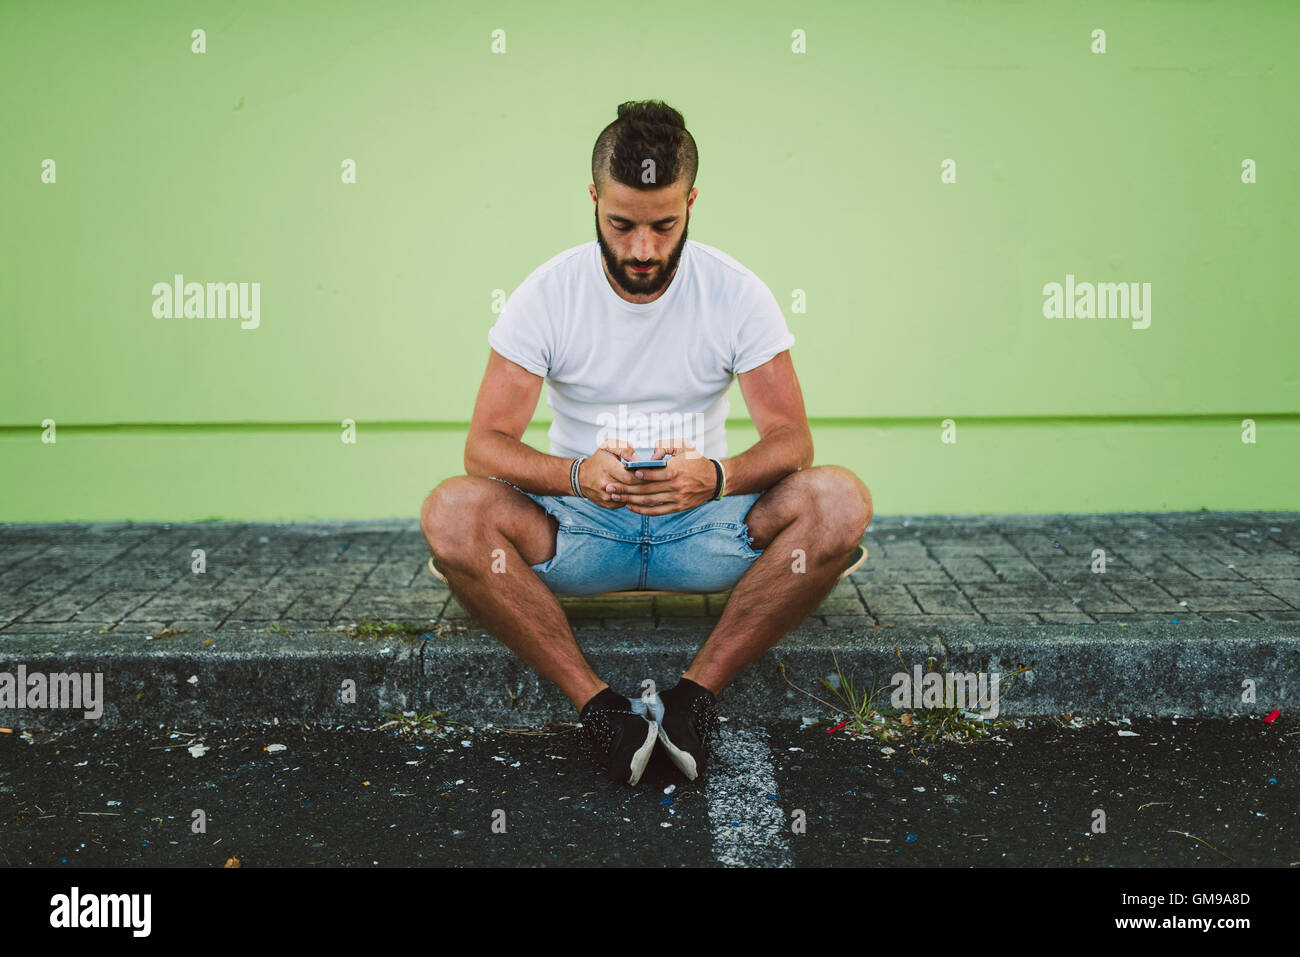 Man sitting on his skateboard at carb text messaging Stock Photo